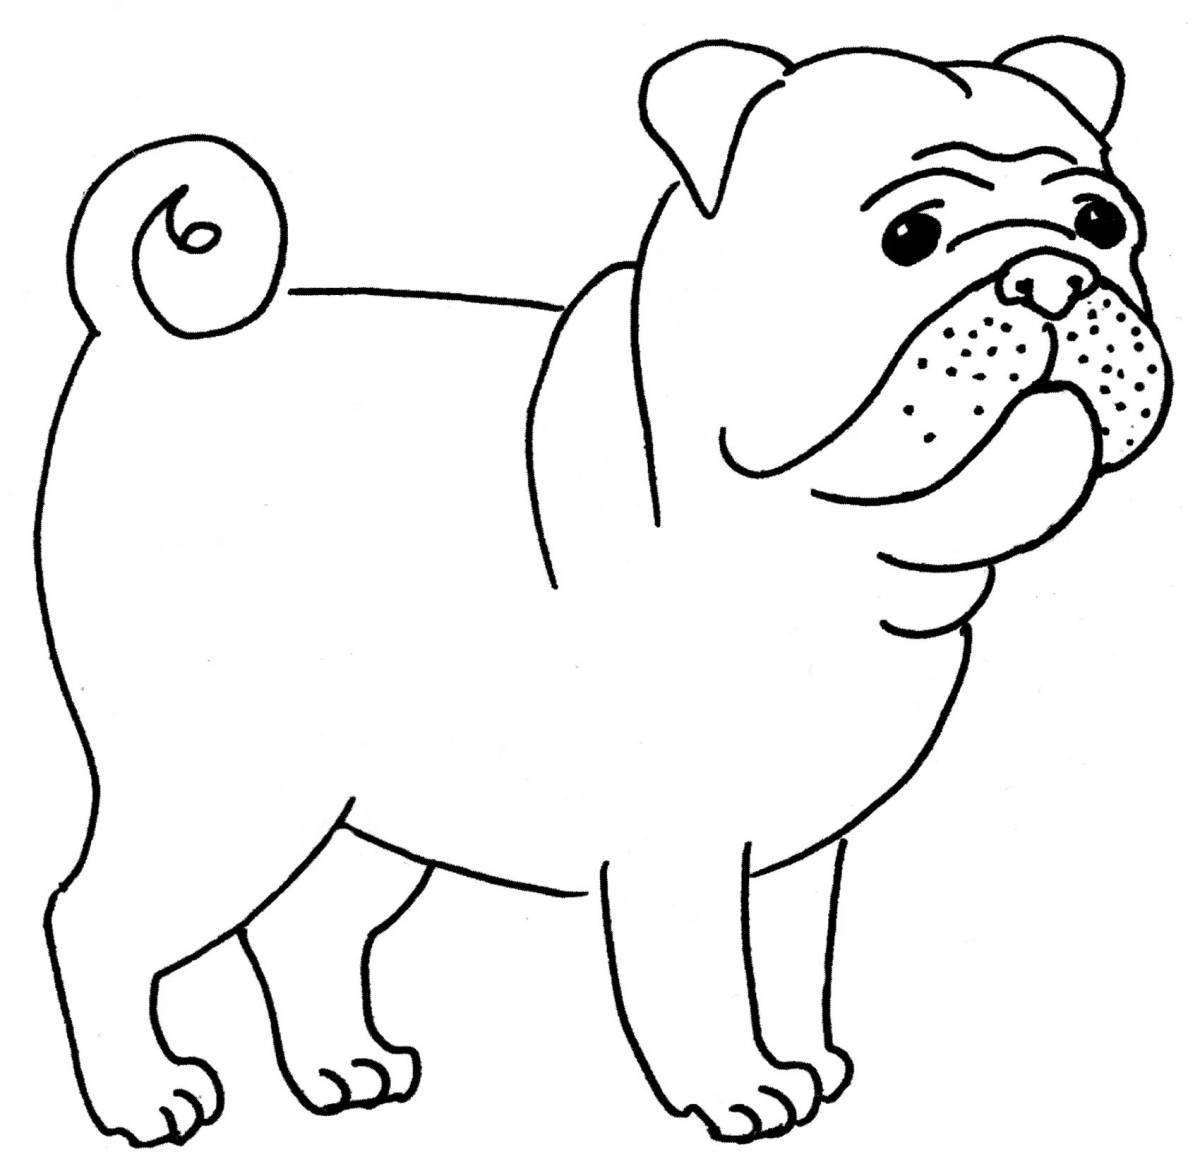 Pug coloring page with bubbles